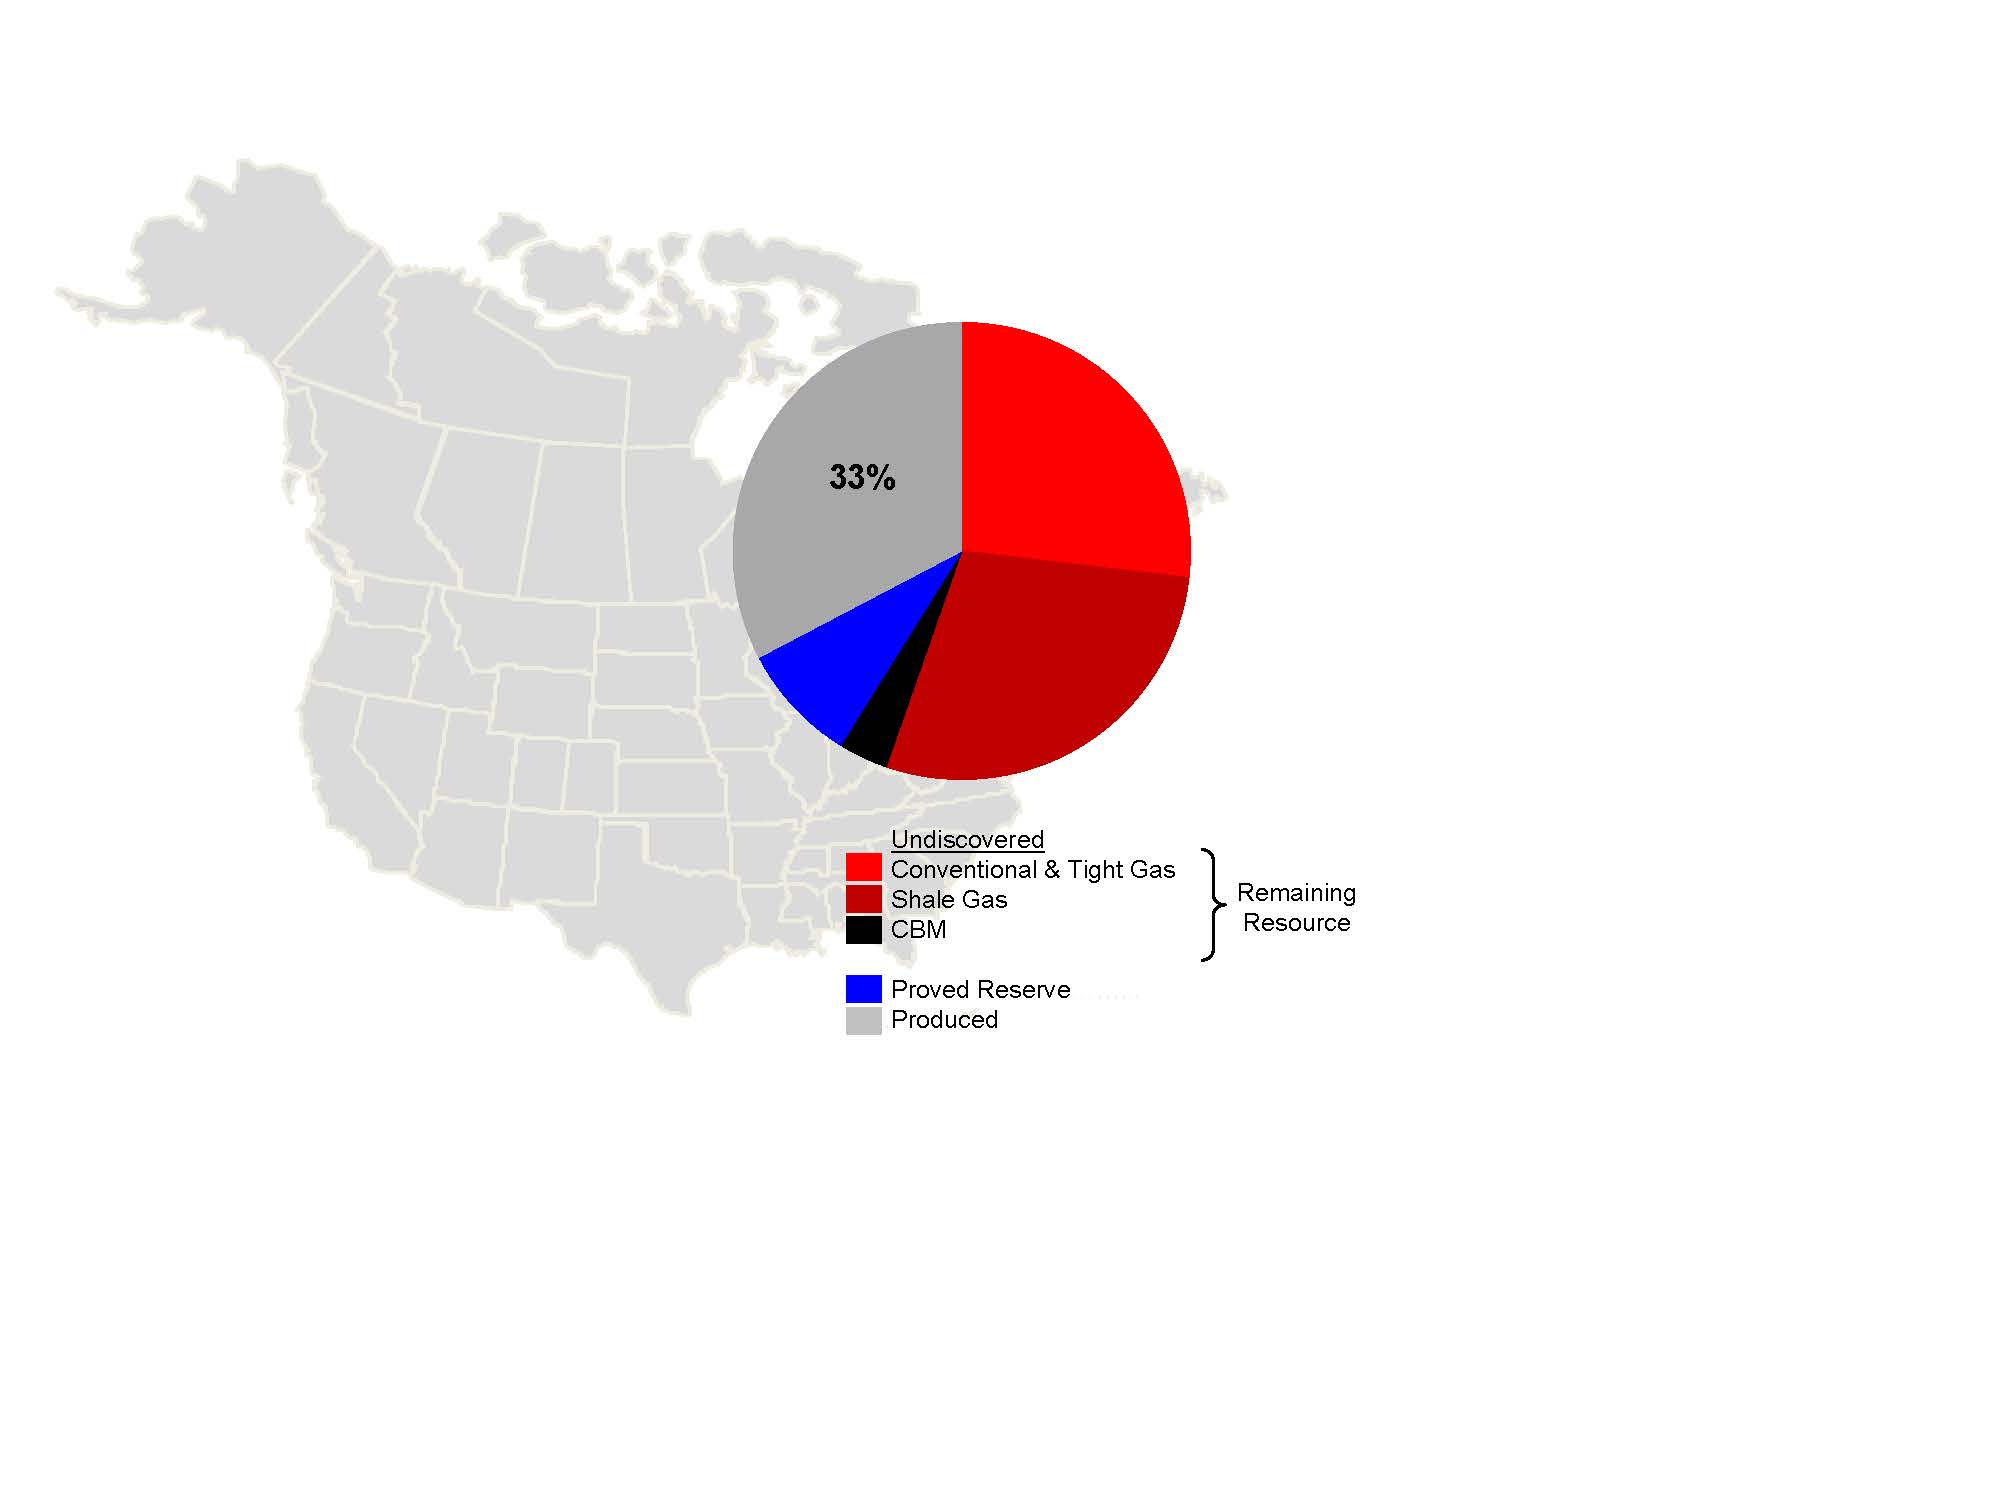 Figure 1. North American Ultimate Potential Gas Resource